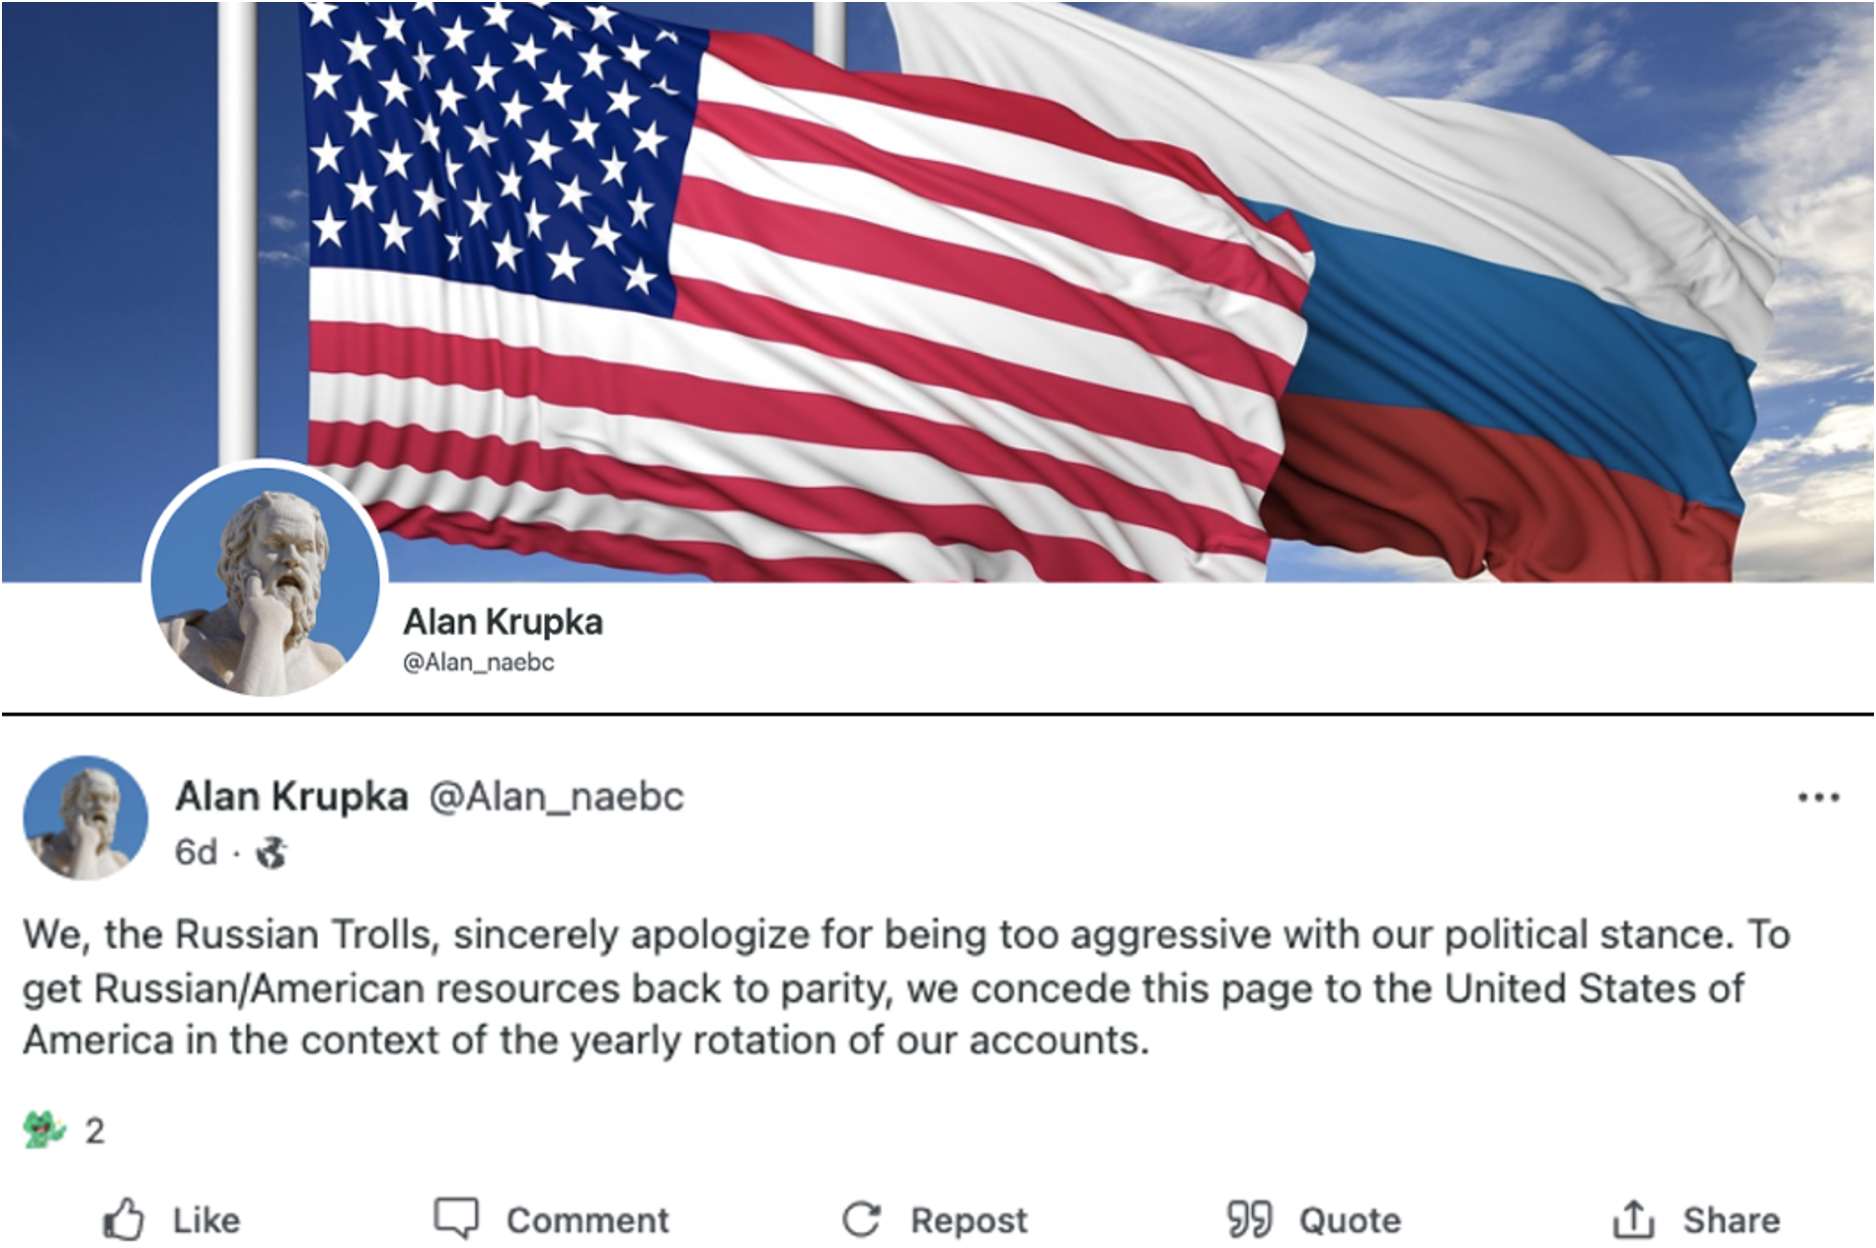 Example of changes made to an NAEBC persona account following the election, including a banner with a Russian flag (top) and a post pinned to the account’s feed suggesting it is a “Russian troll” account (bottom)